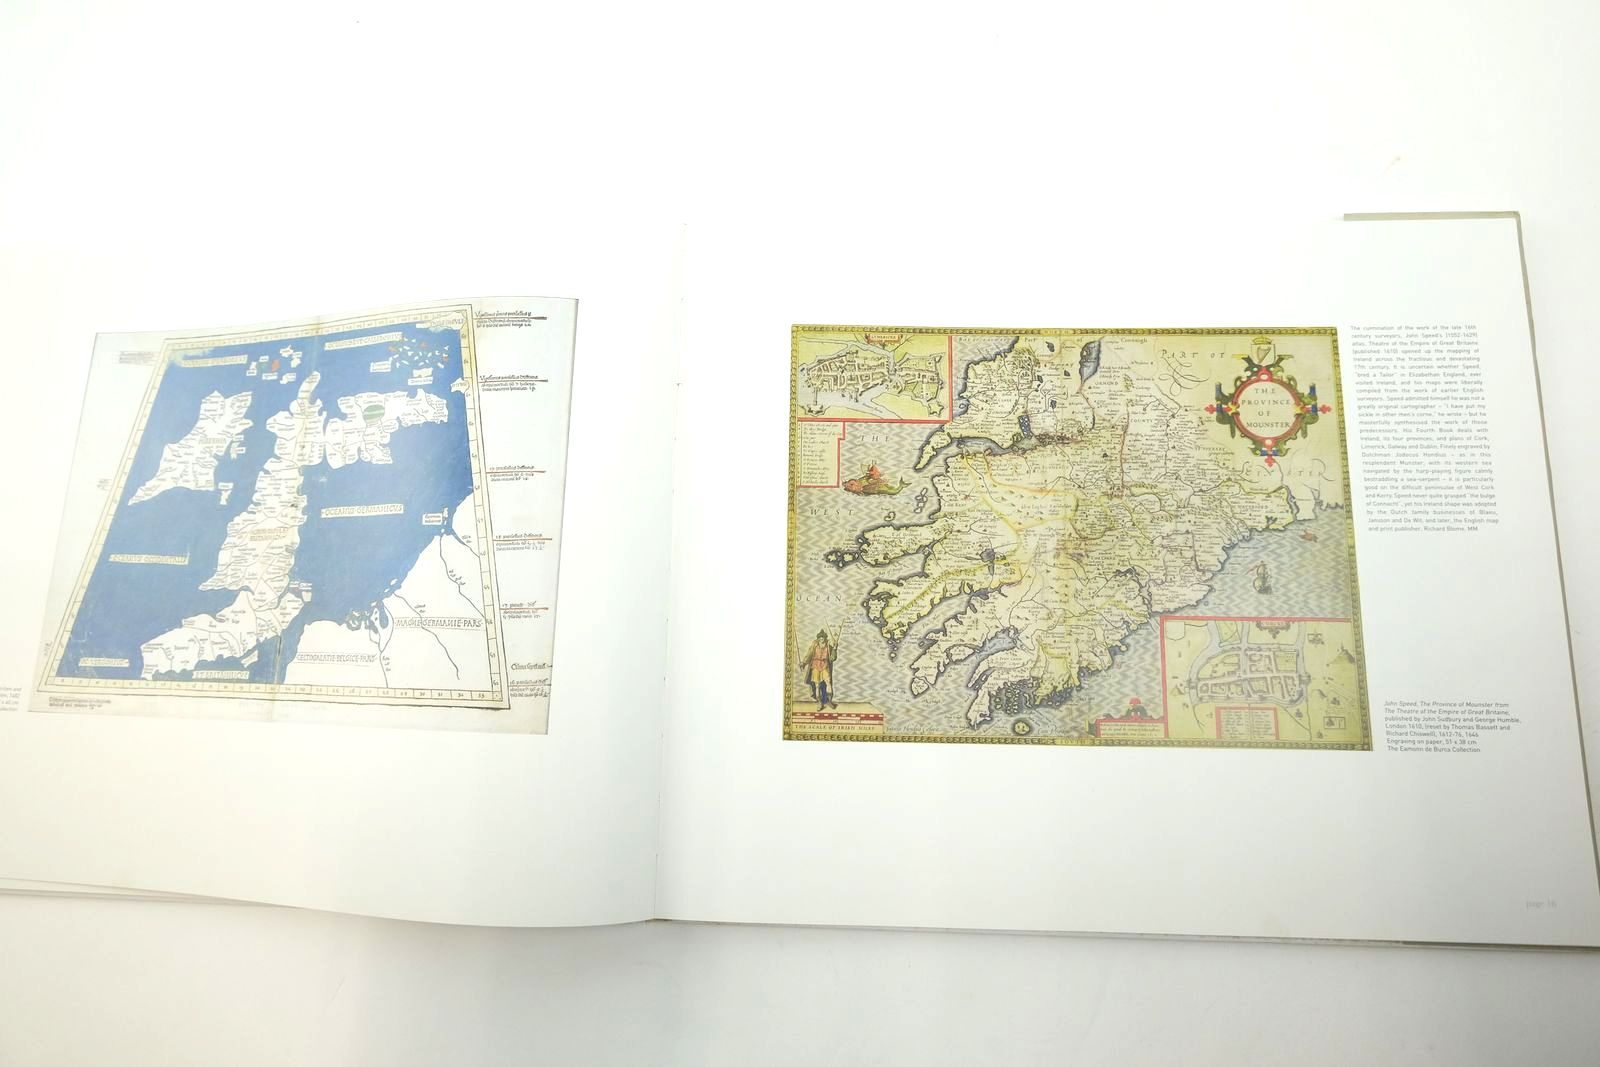 Photo of [C]ARTOGRAPHY MAP-MAKING AS ARTFORM written by Smyth, William J.
Laffan, William
Moroney, Mic published by Crawford Art Gallery, Raven Design (STOCK CODE: 2140852)  for sale by Stella & Rose's Books